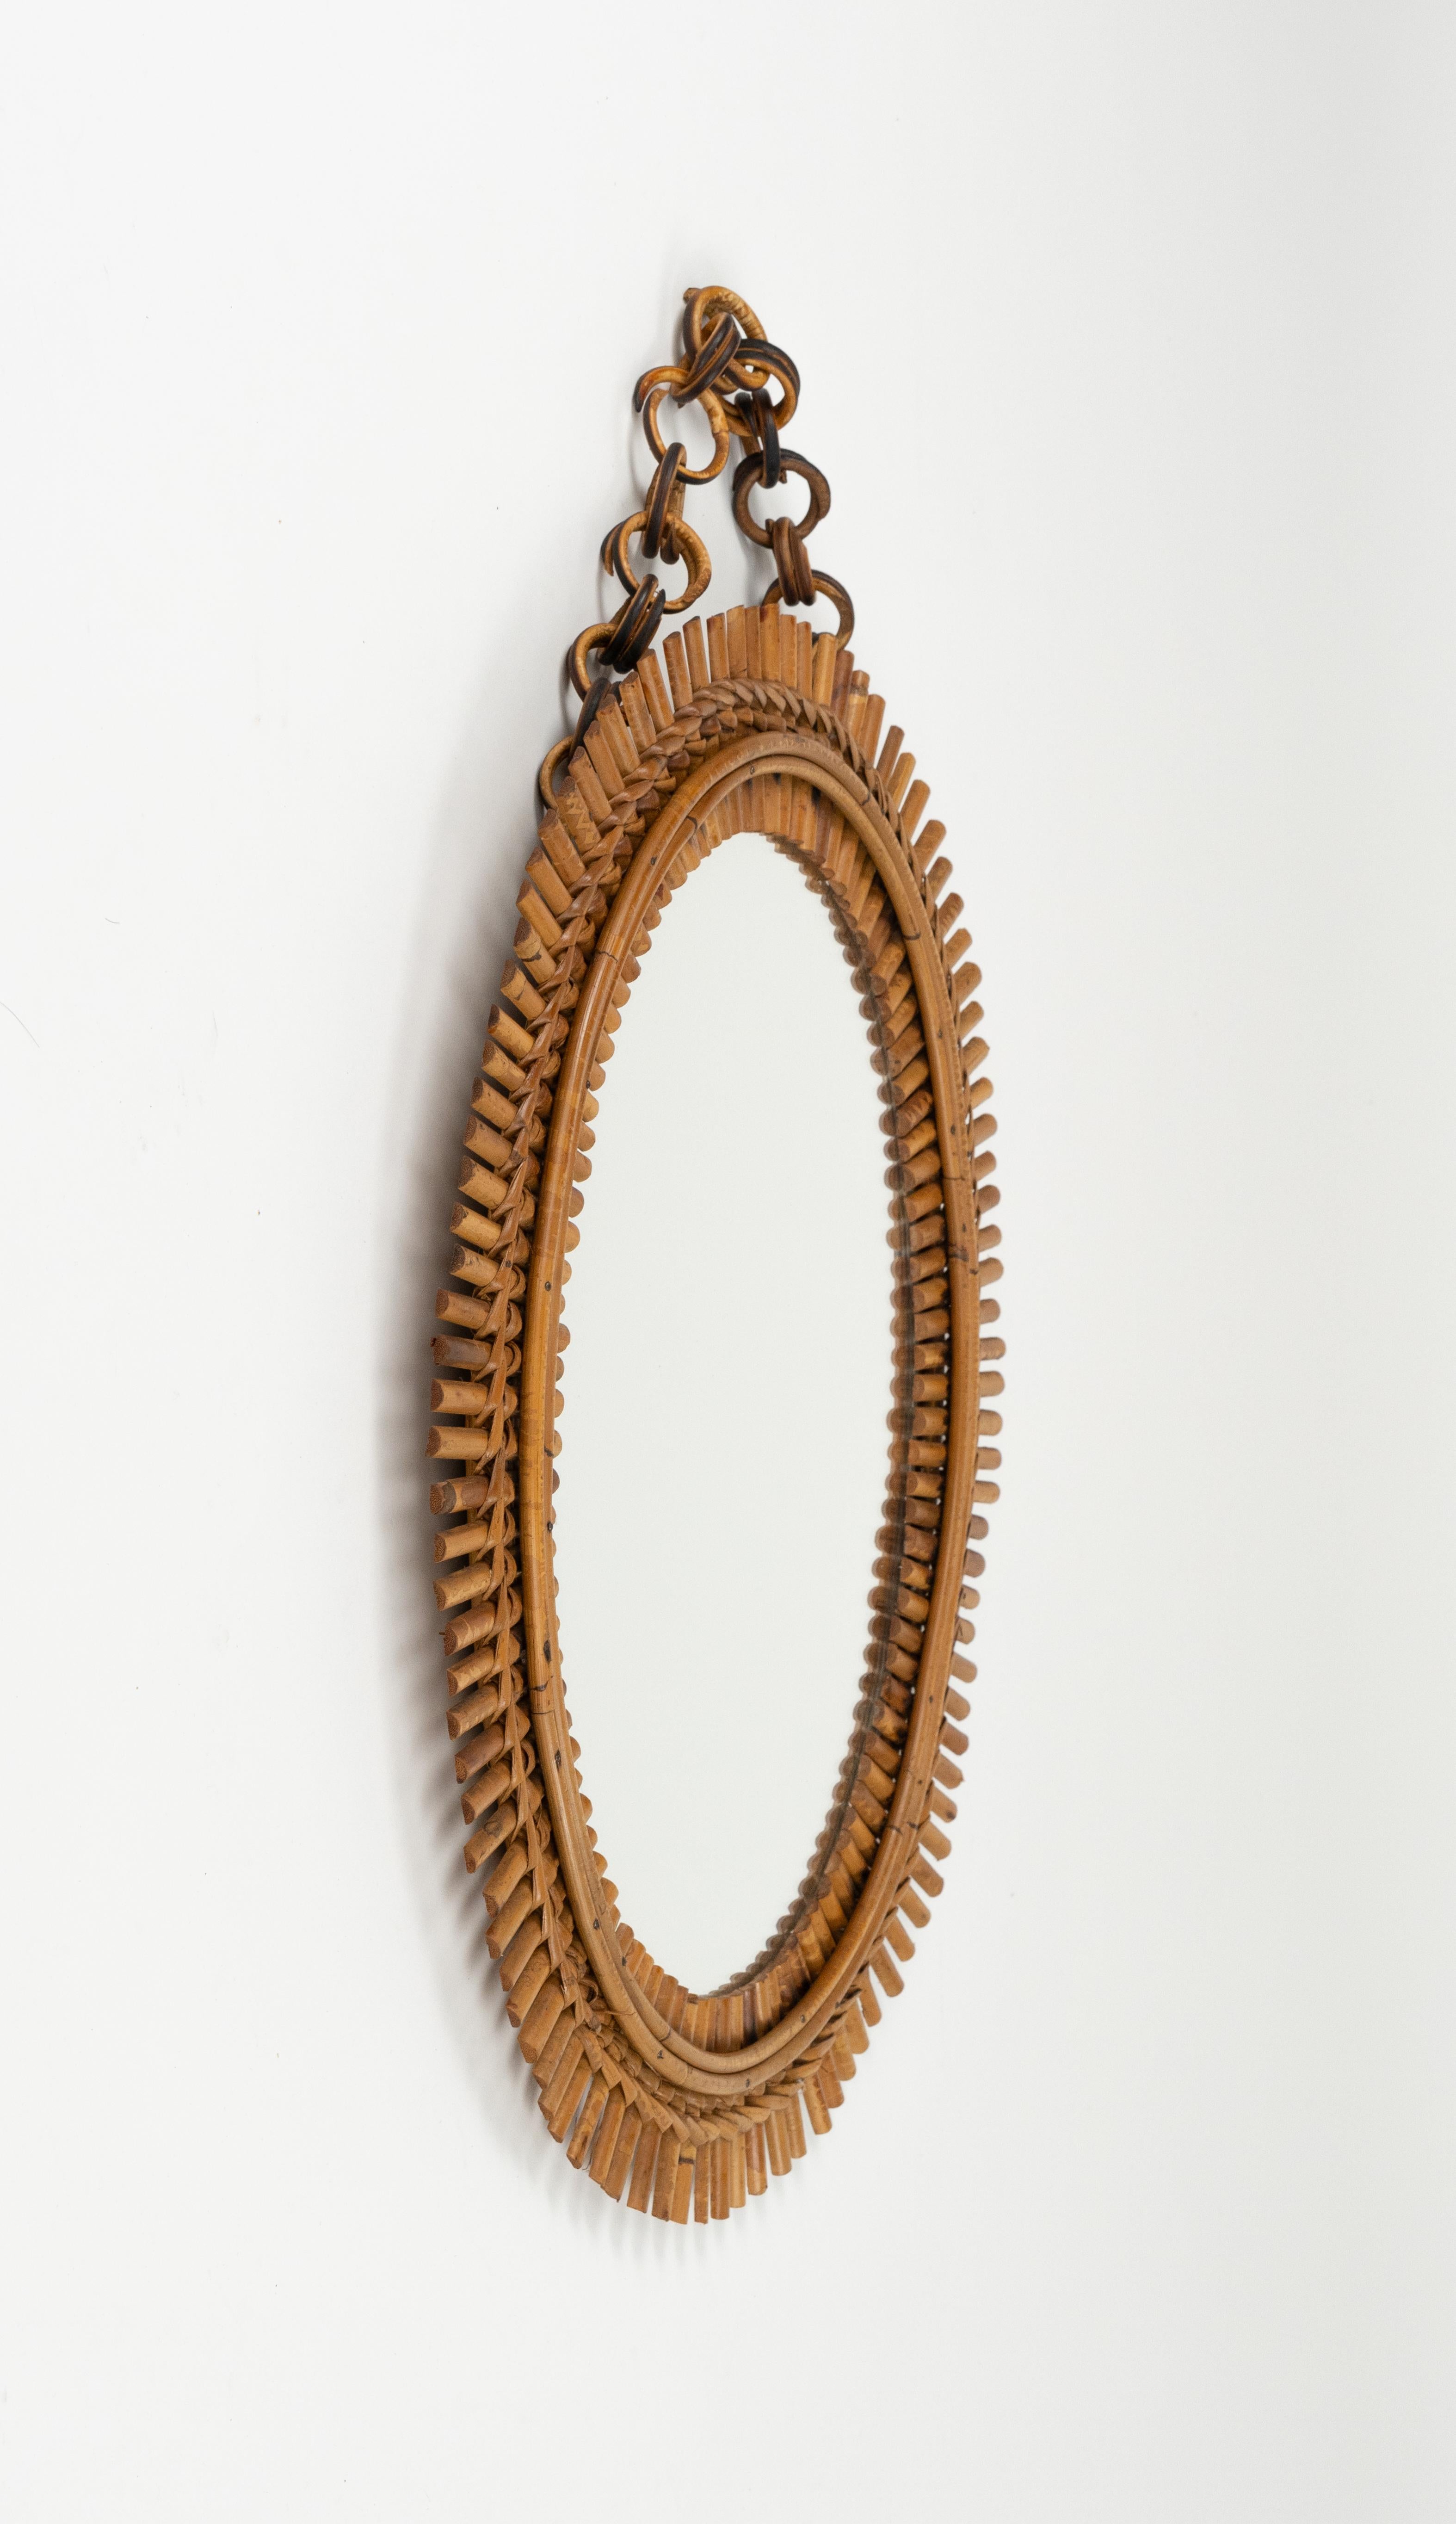 Midcentury beautiful oval wall mirror with chain in bamboo and rattan in the style of Franco Albini.   

Made in Italy in the 1960s.   

A highly decorative mirror. 

Dimensions without chain: 
Height 58 cm. 
Width 47 cm. 
Depth 4 cm.